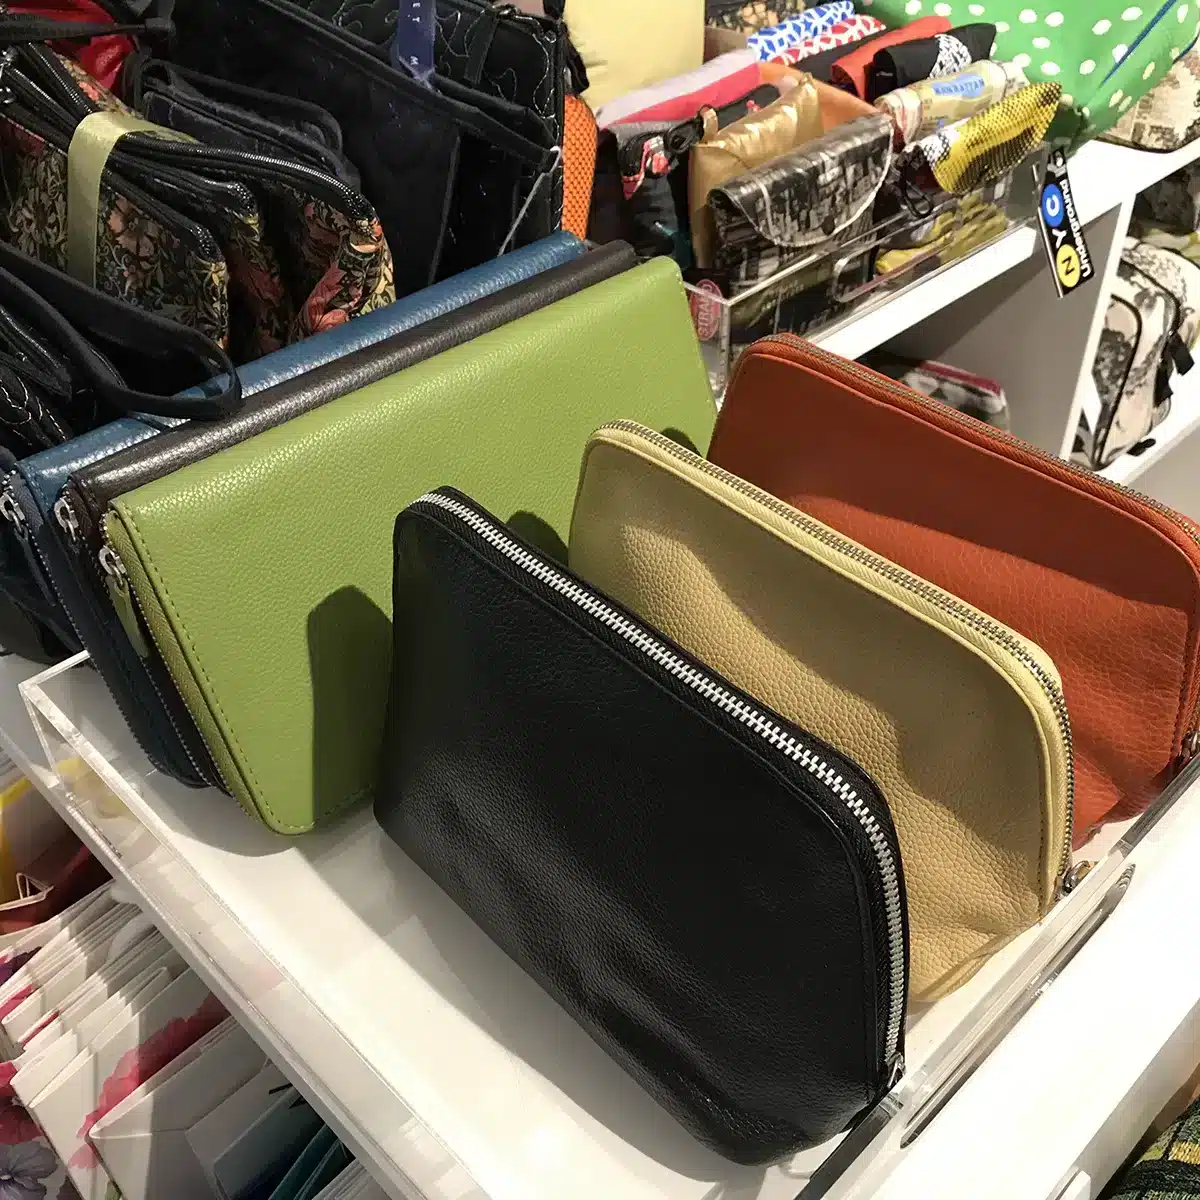 Samples of custom color leather cosmetic bags in the Gouda showroom